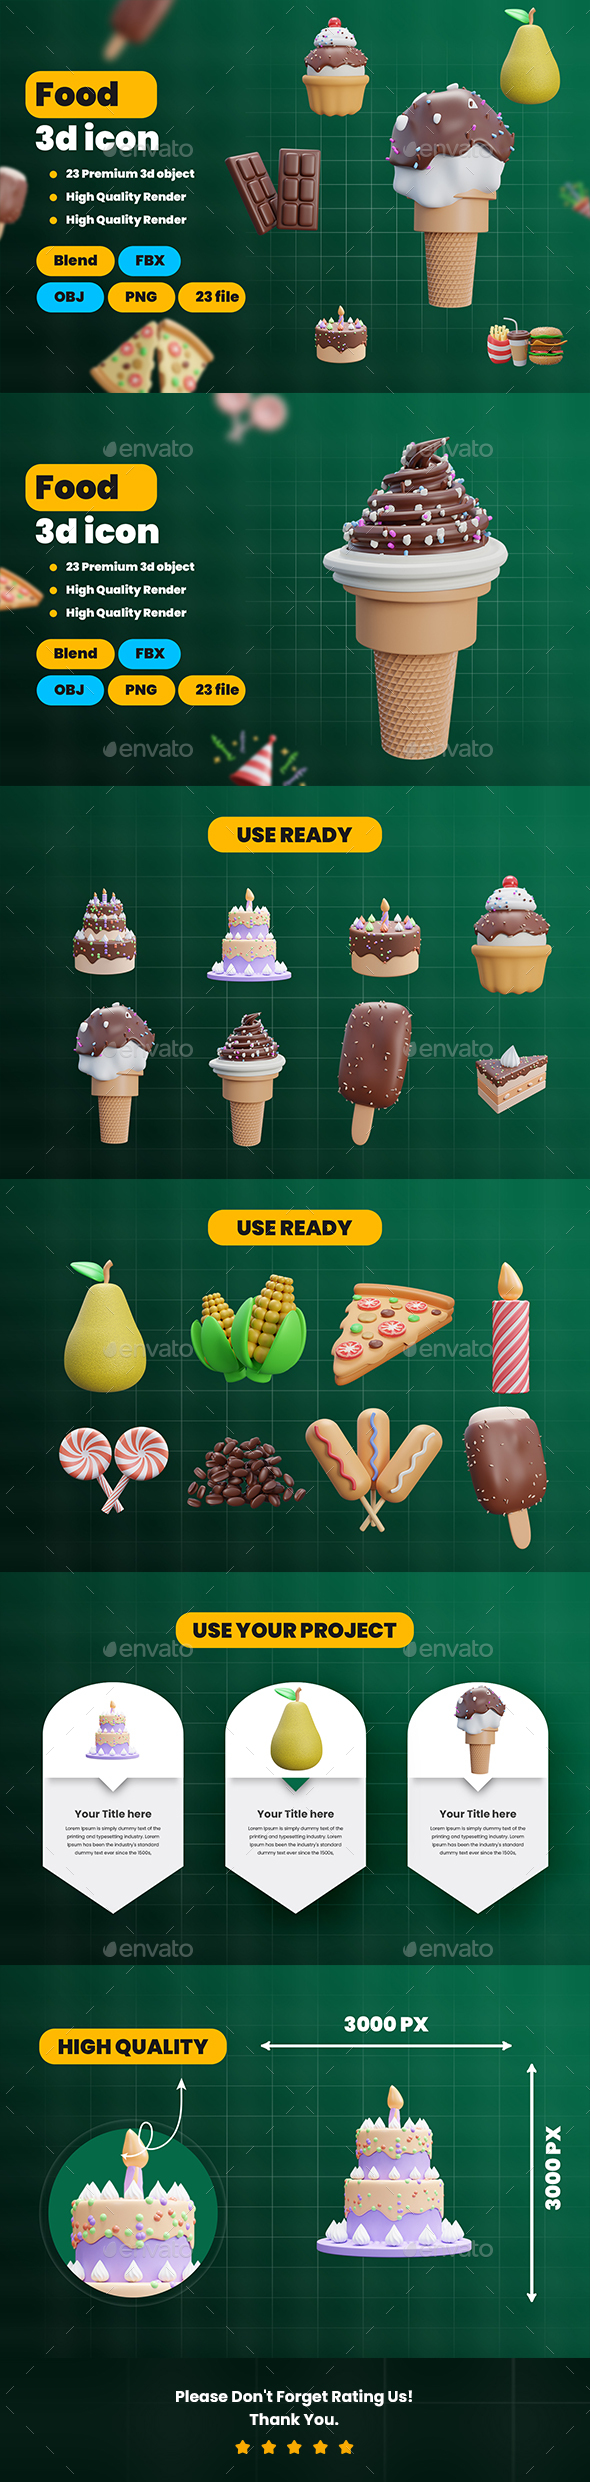 [DOWNLOAD]Food 3d Icon Pack